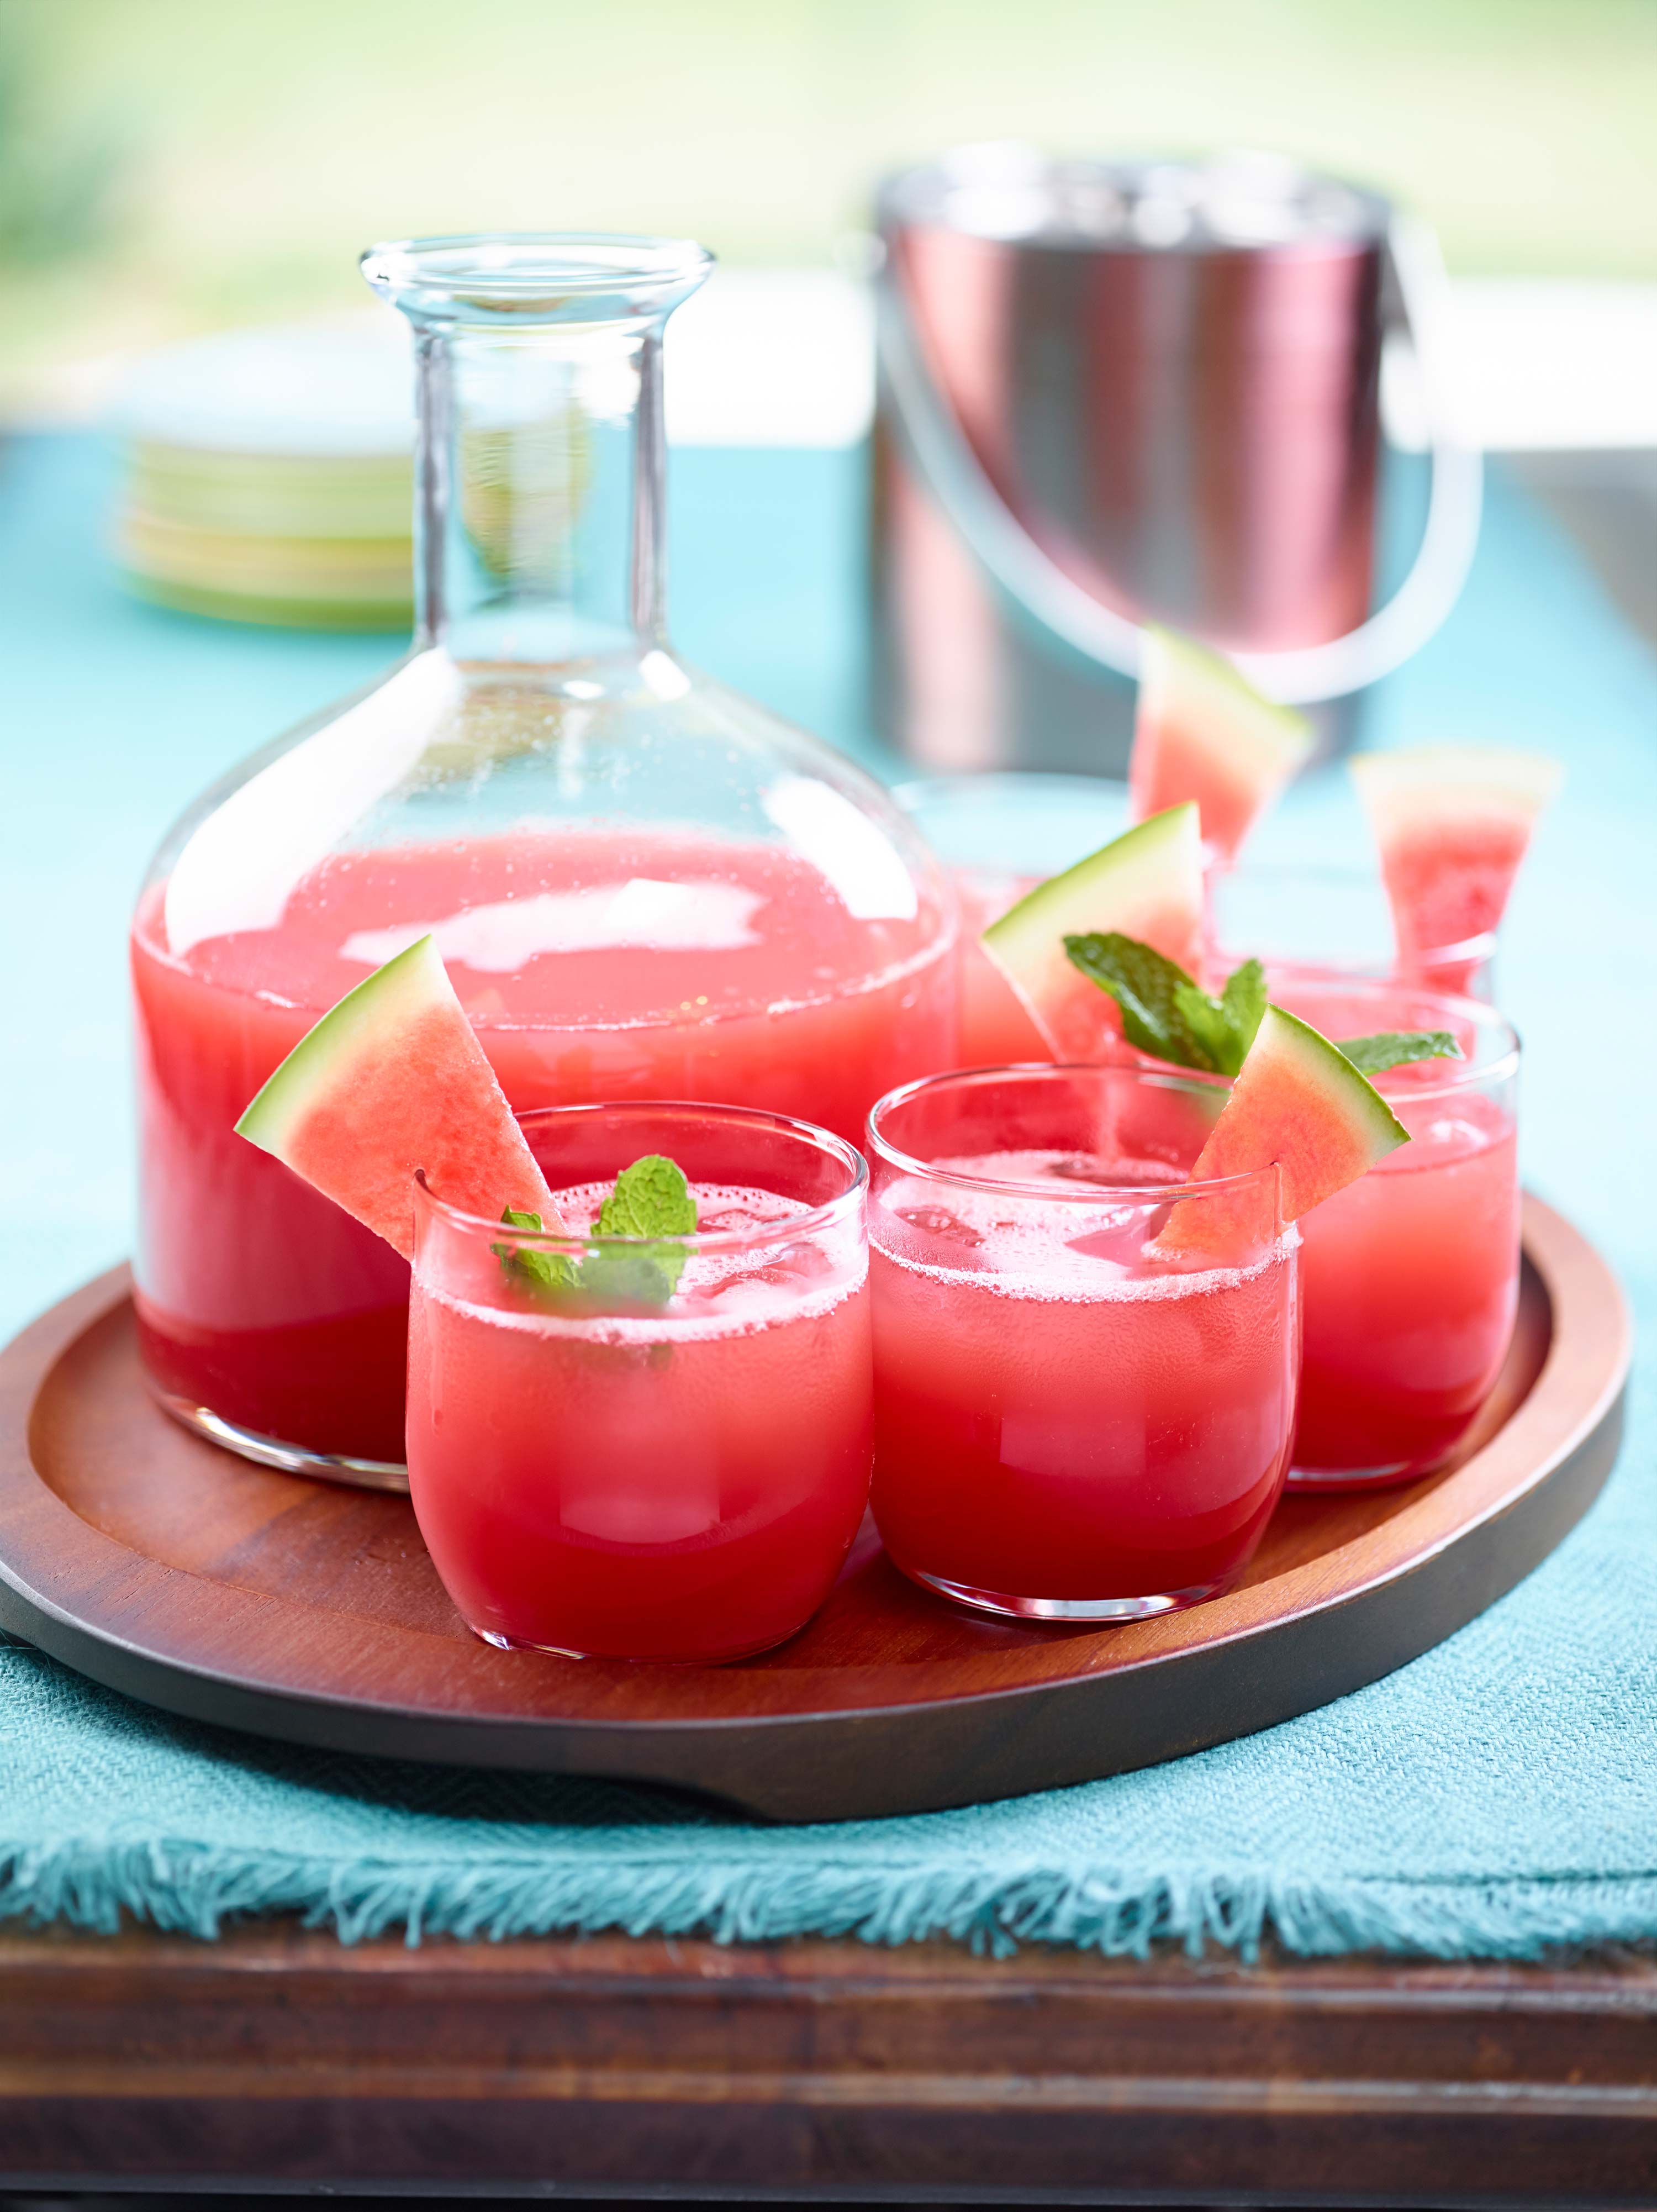 Make Natural Watermelon Juice Step By Step In Manado City